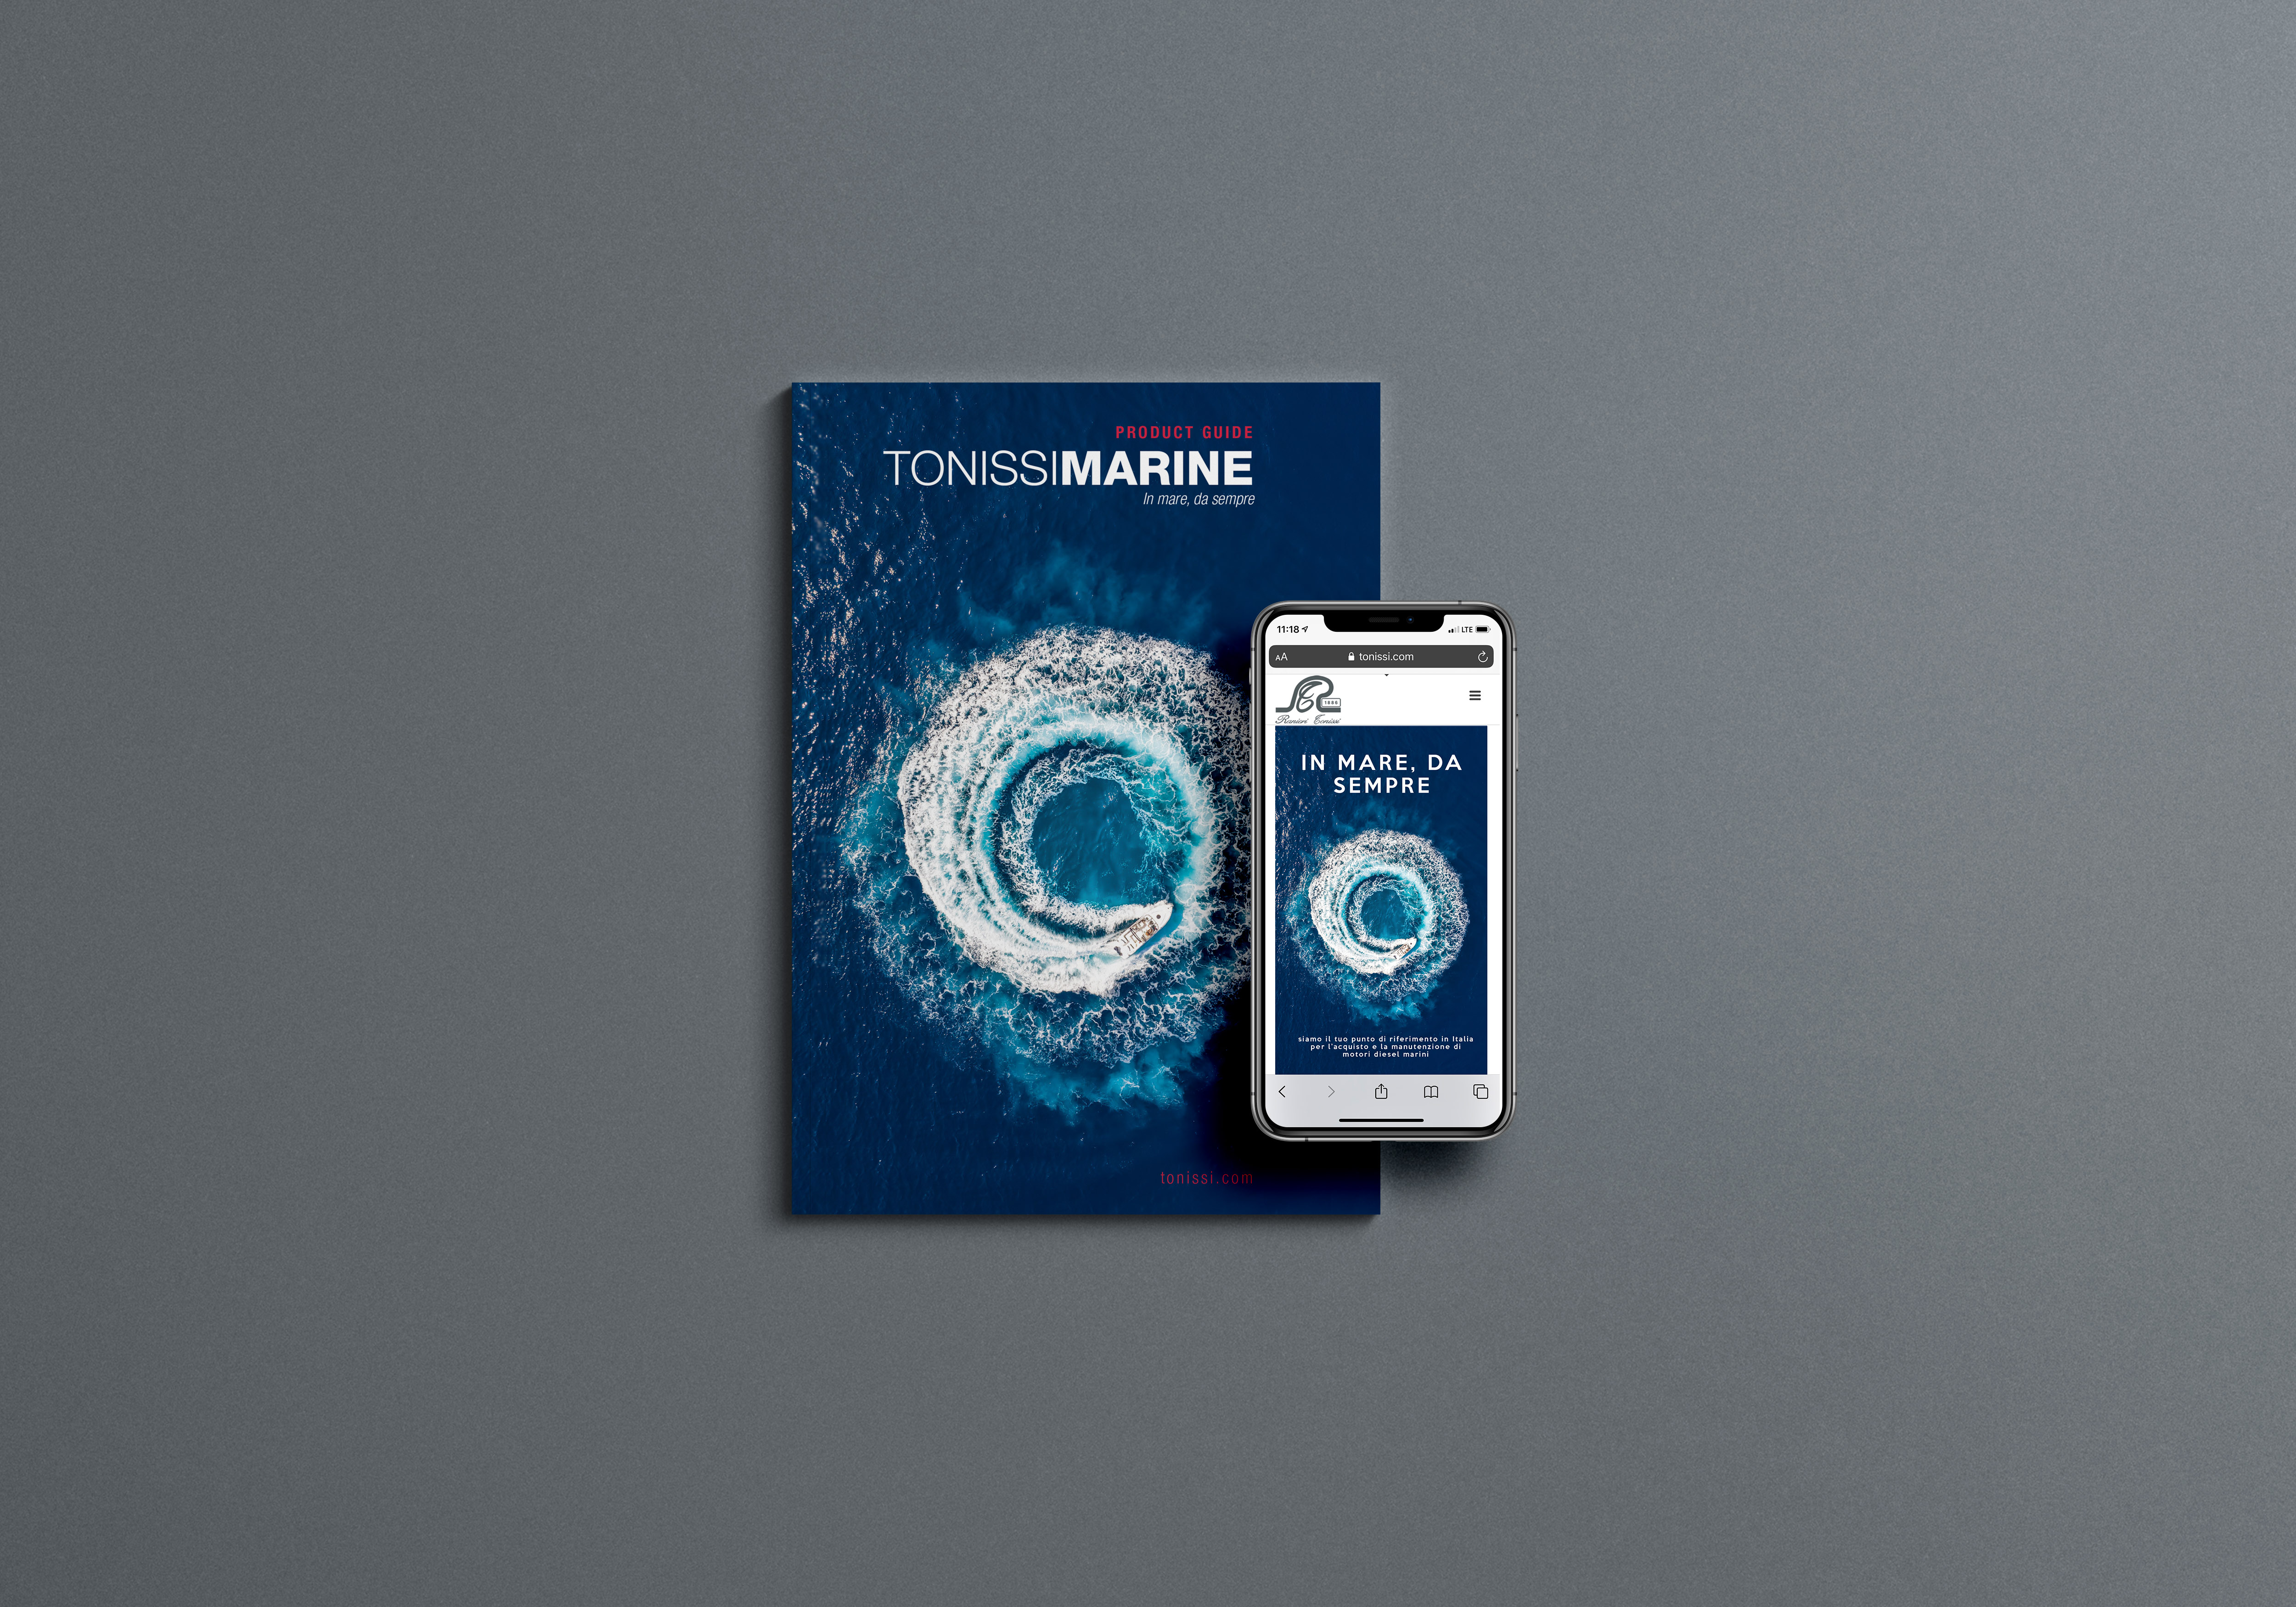 cover product guide tonissi marine